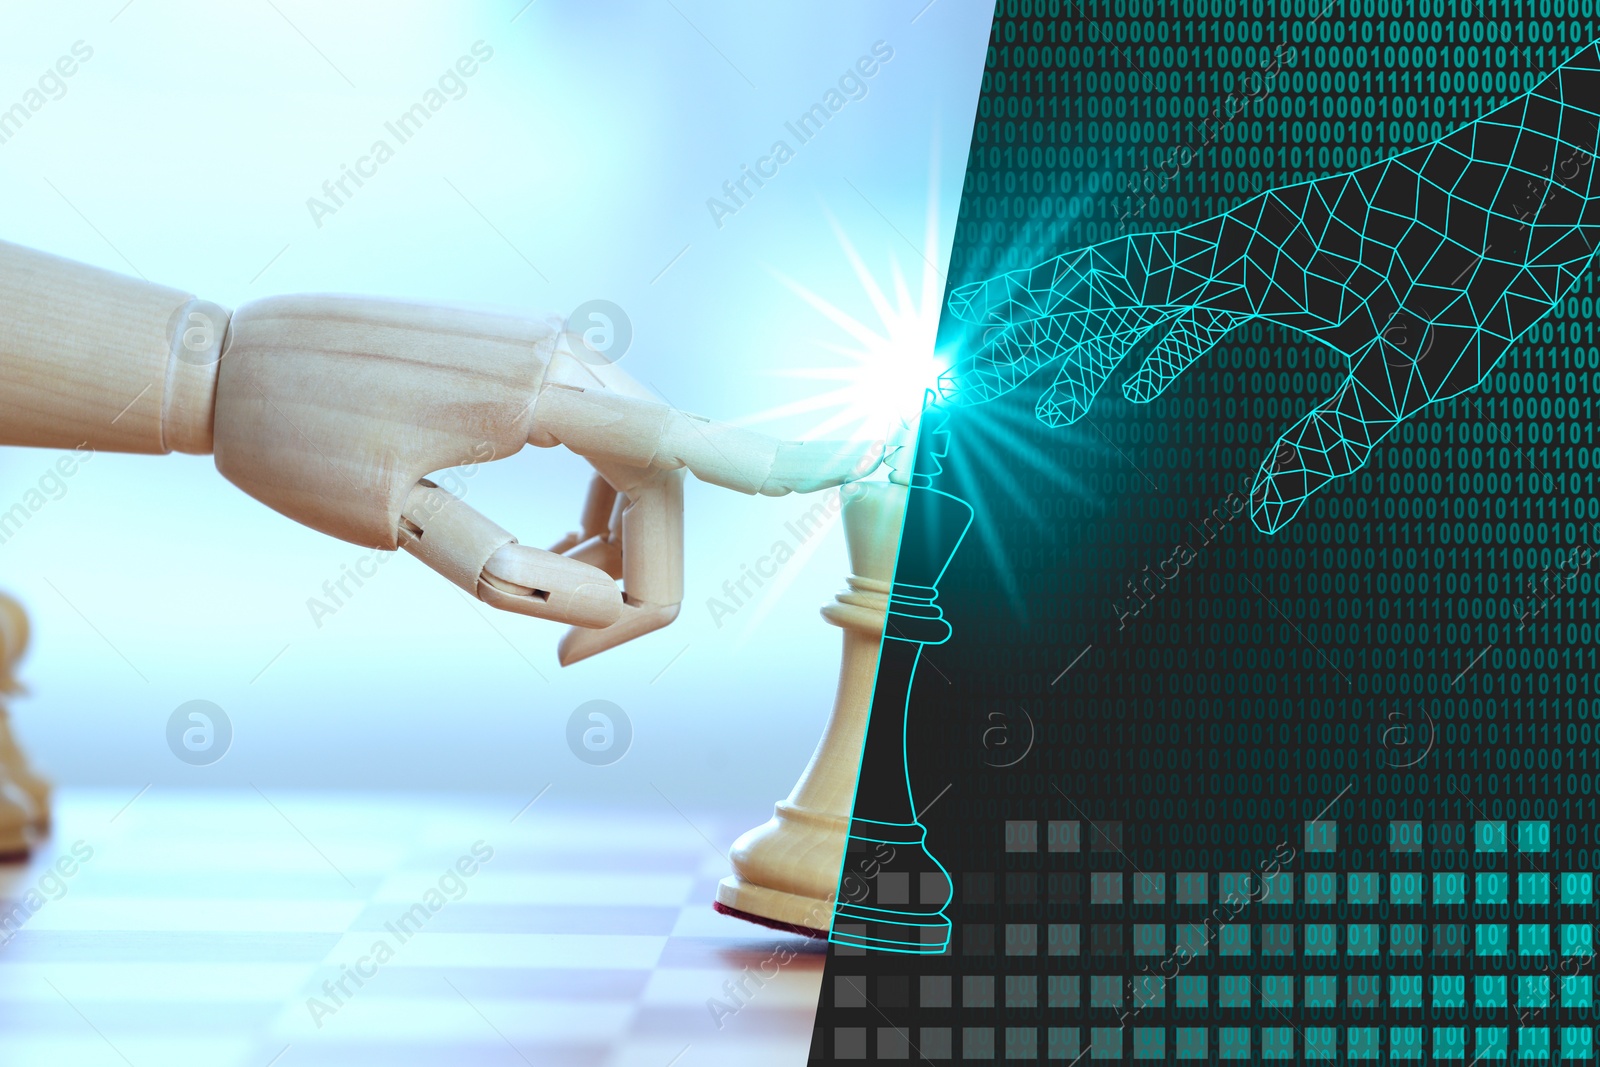 Image of Wooden and digital hands touching chess piece. Cyber hand against binary code symbolizing artificial intelligence